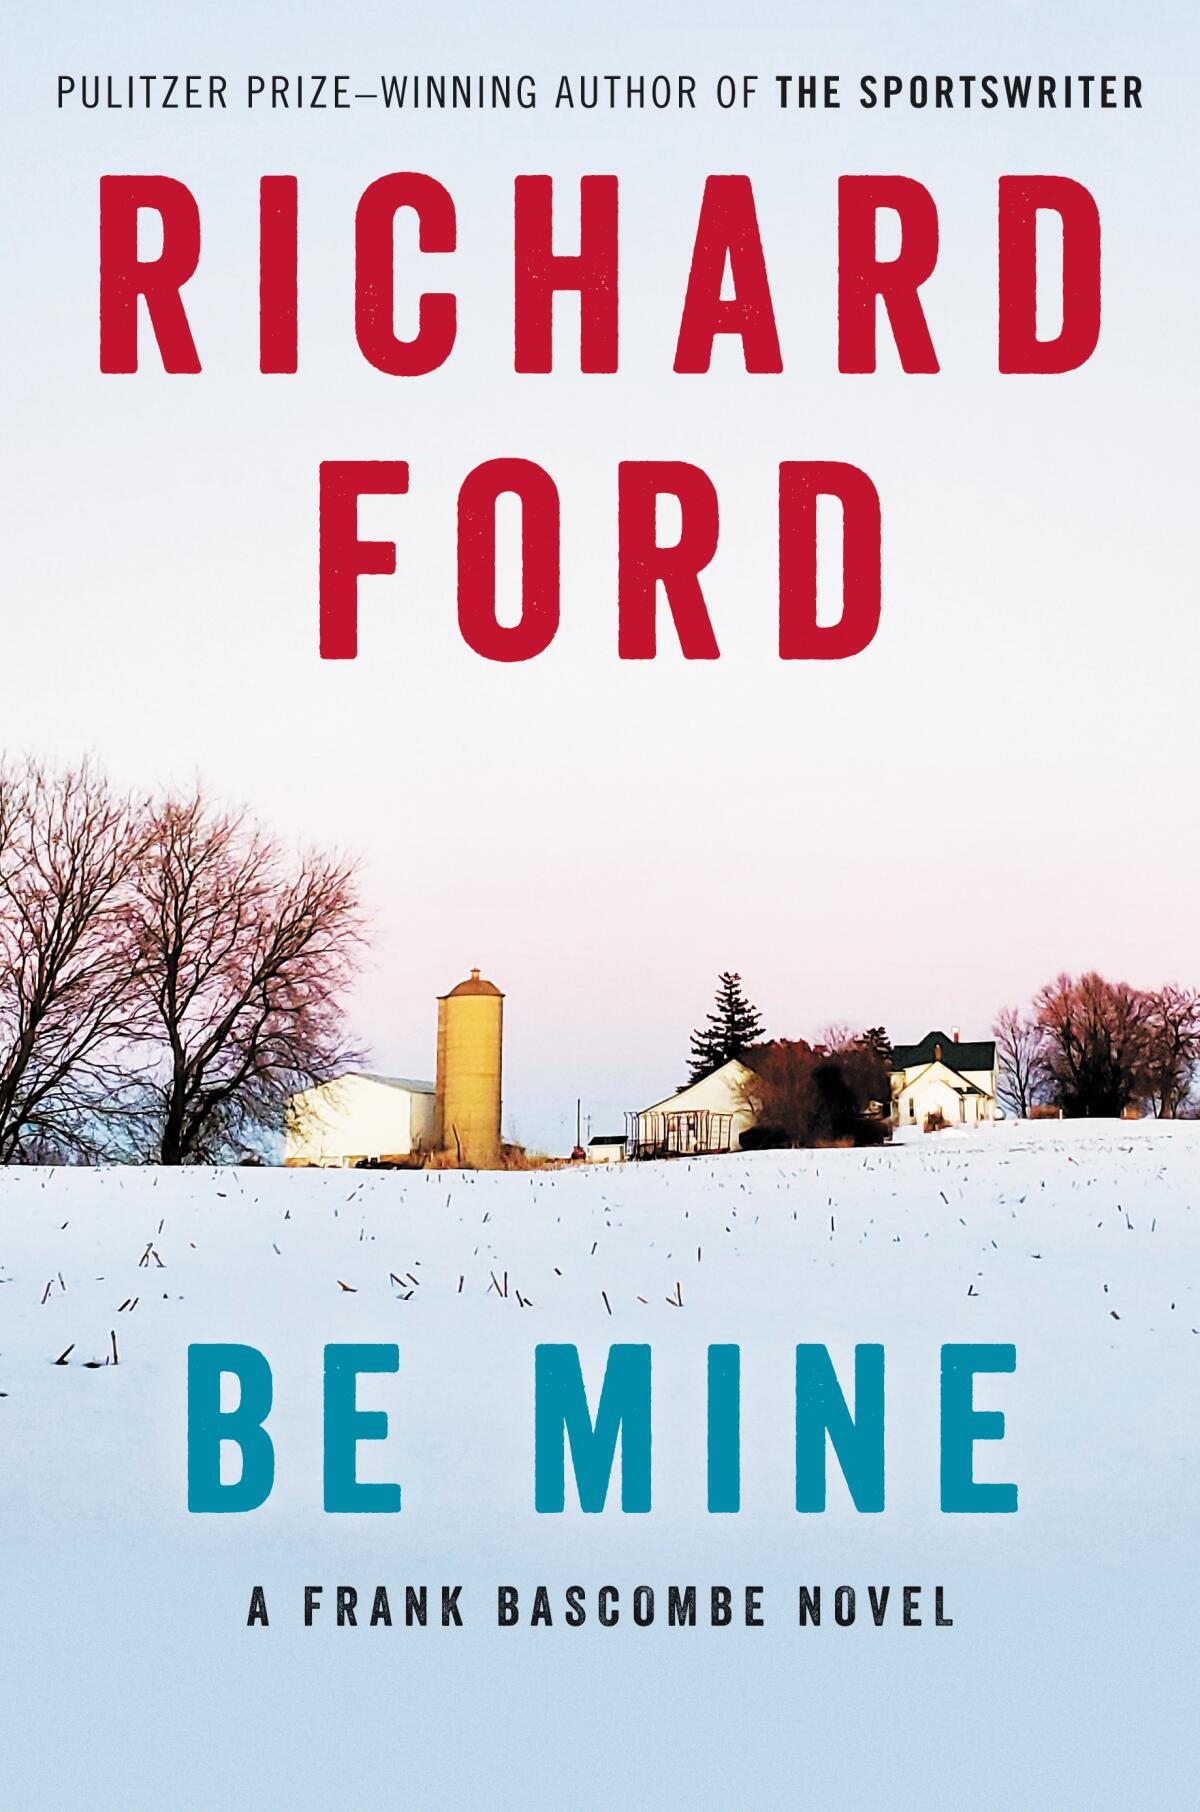 "Be Mine," by Richard Ford